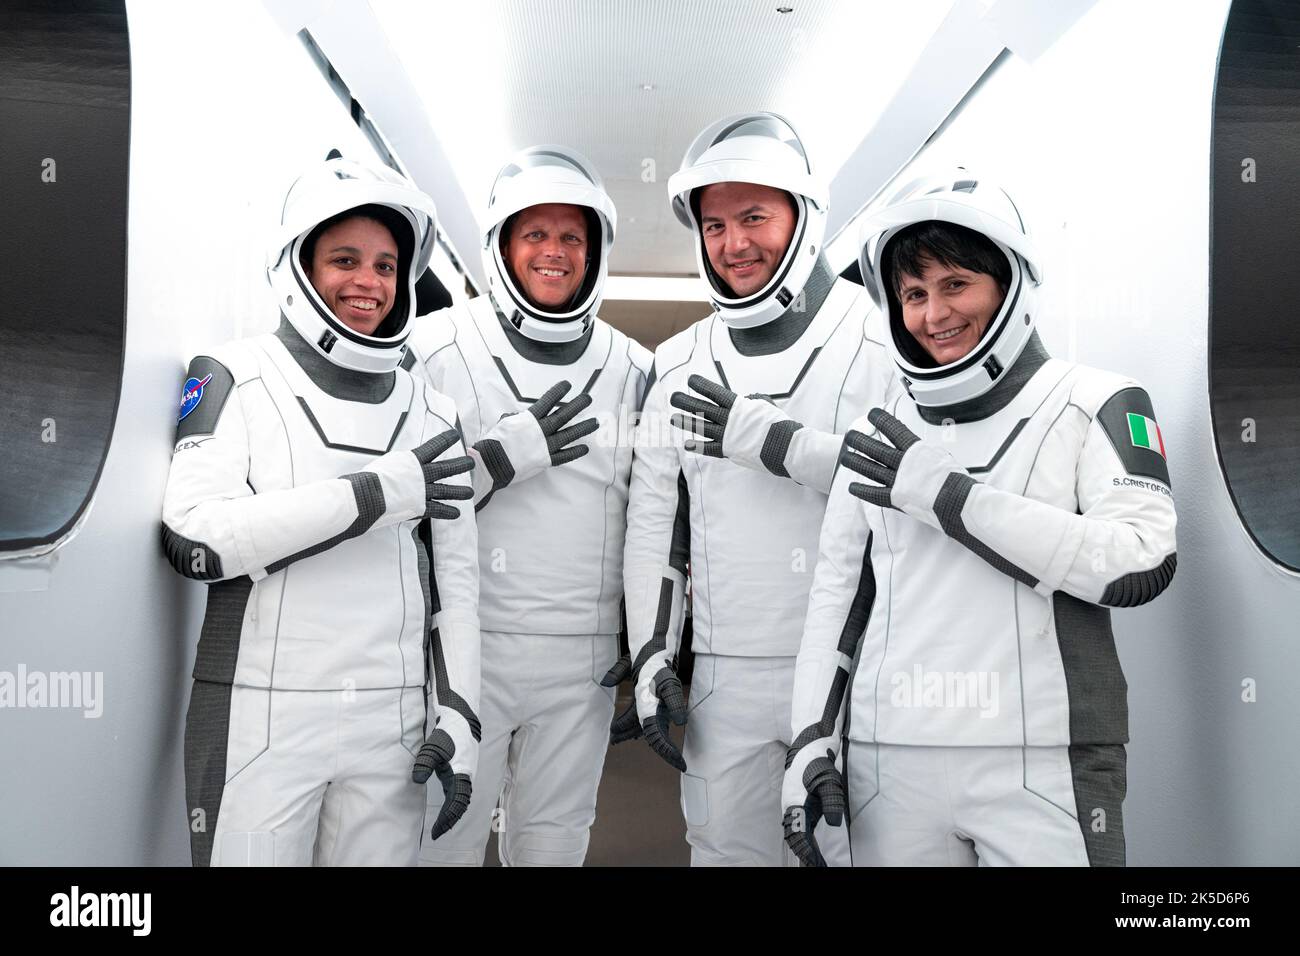 Crew-4 astronauts, from left, Jessica Watson, mission specialist; Bob Hines, pilot; Kjell Lindgren, commander and Samantha Cristoforetti, mission specialist, pose outside SpaceX’s Crew Dragon, named Freedom by the Crew-4 crew, during a dry dress rehearsal at Kennedy Space Center in Florida on April 20, 2022. Crew-4 will launch the astronauts to the International Space Station as part of NASA’s Commercial Crew Program. Liftoff is targeted for 5:26 a.m. EDT on Saturday, April 23, 2022, from Launch Complex 39A at Kennedy. Stock Photo